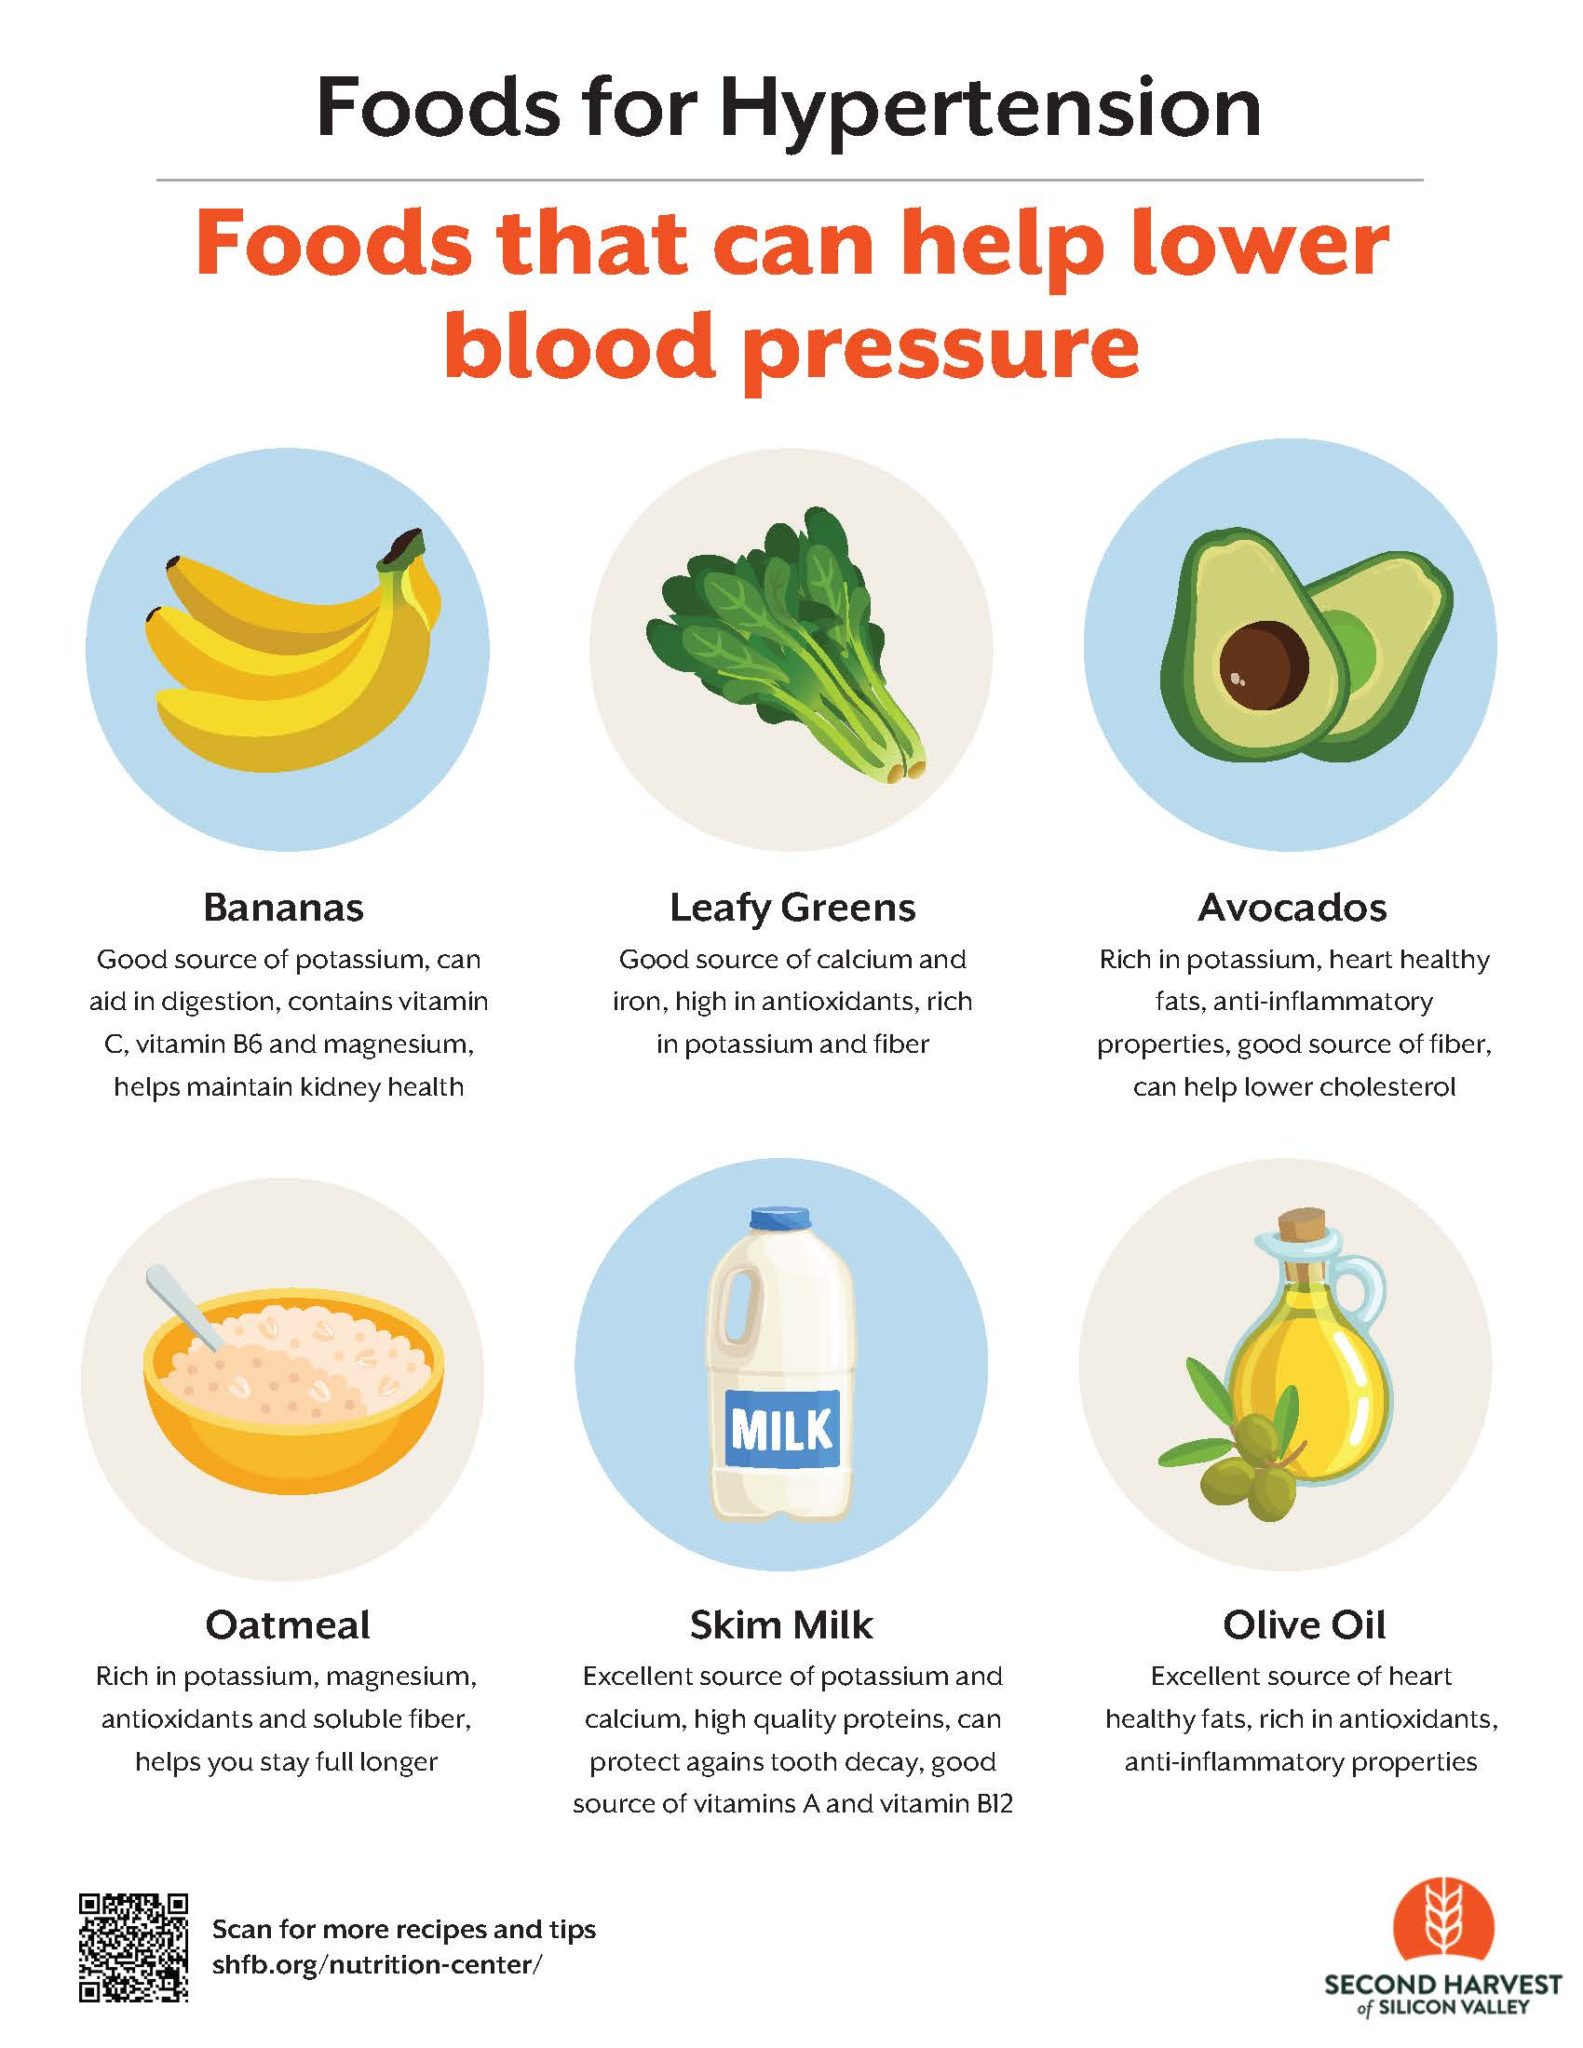 Foods that can help lower blood pressure